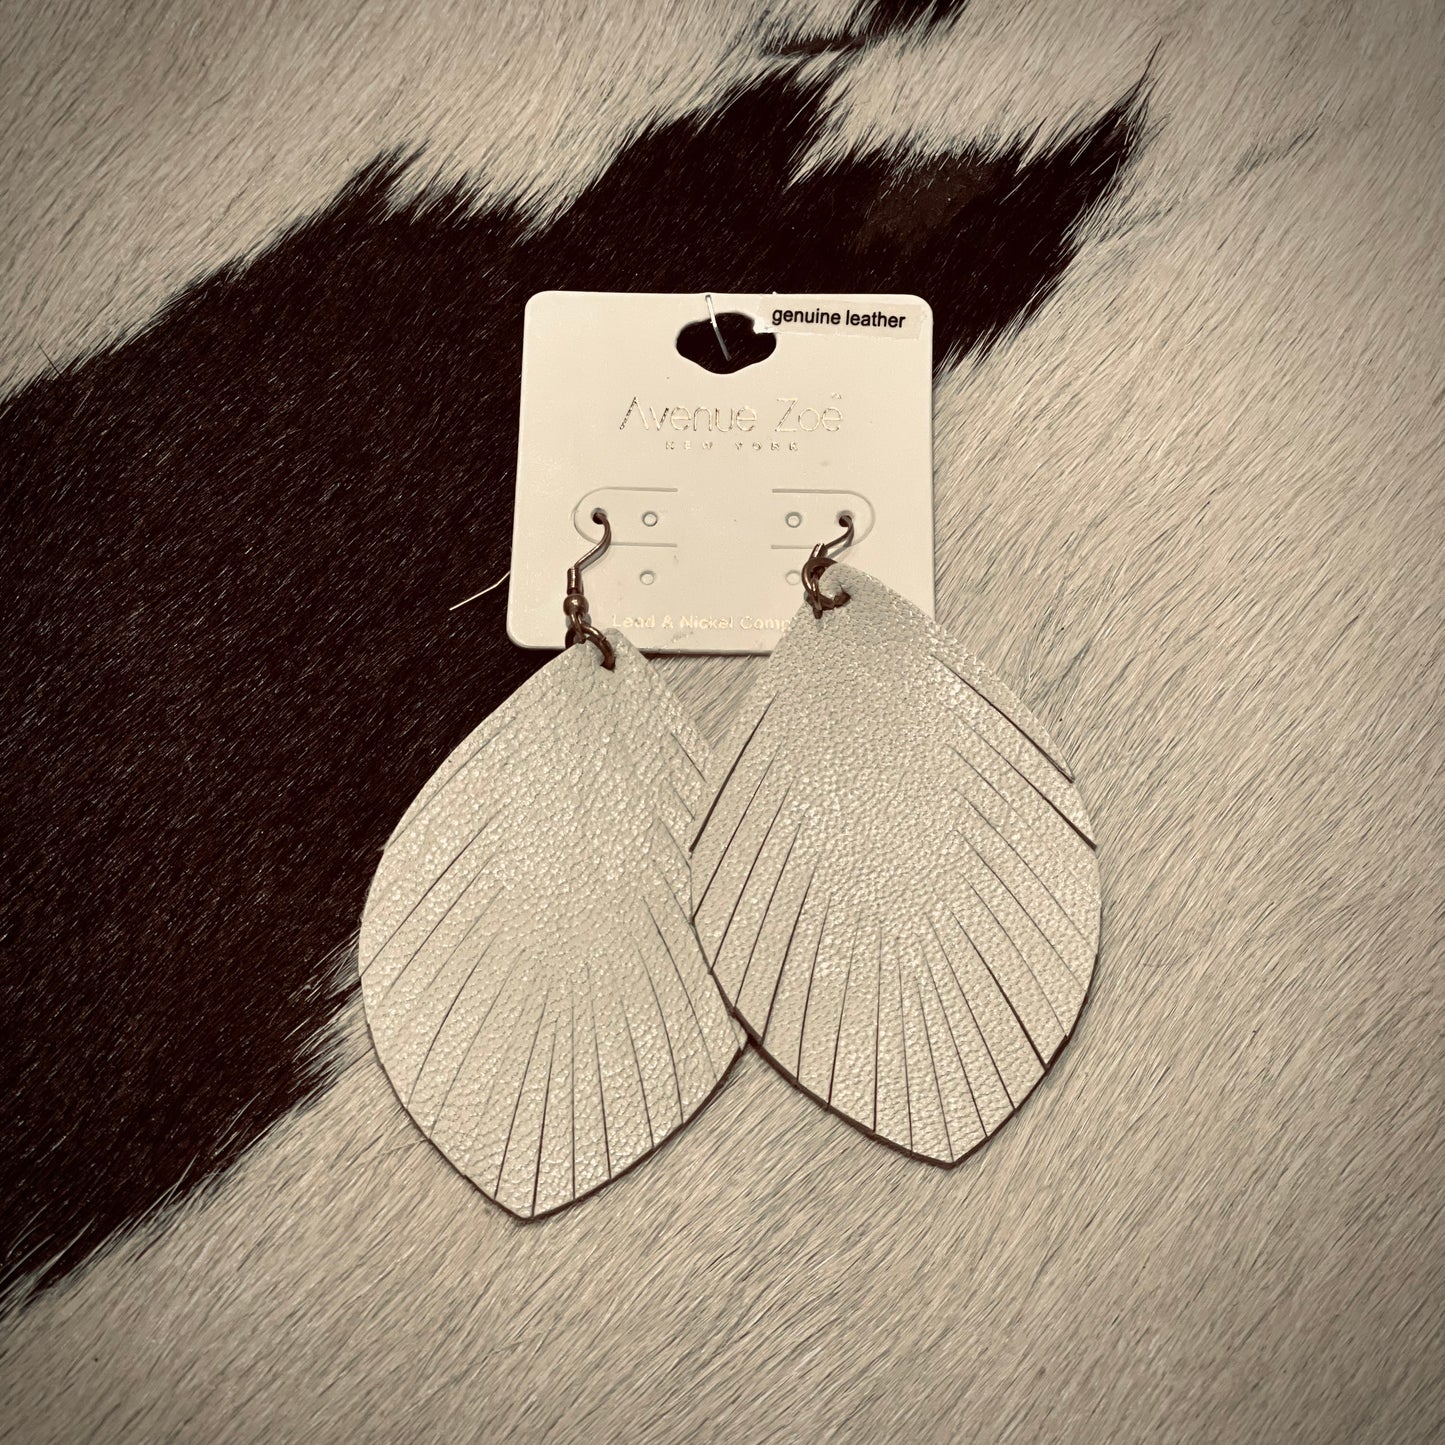 Feathered Leather Earrings